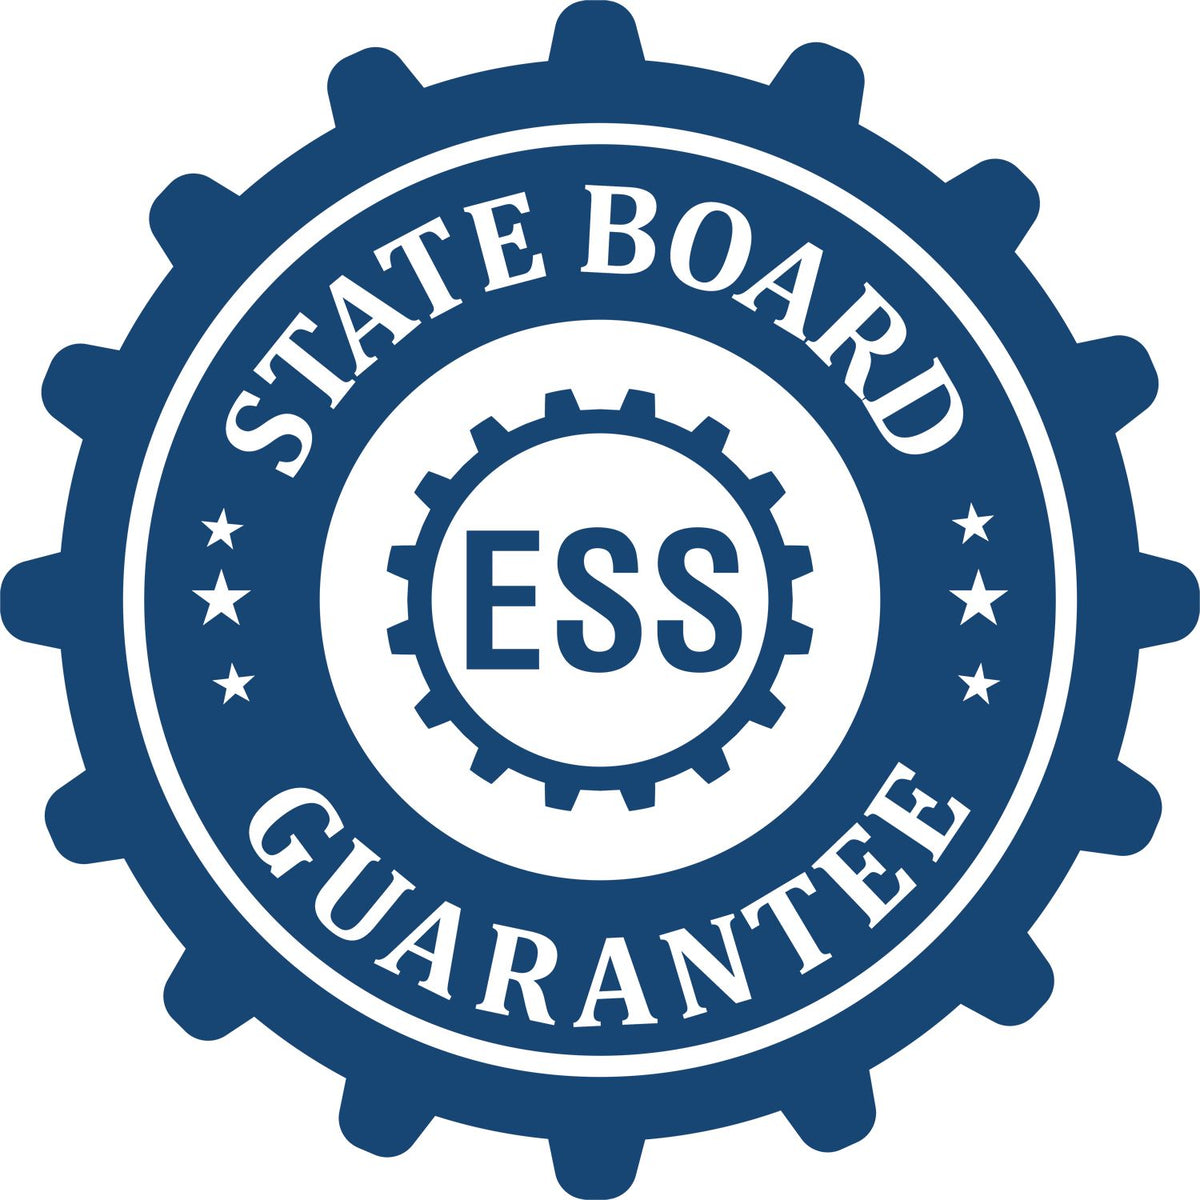 An emblem in a gear shape illustrating a state board guarantee for the State of Idaho Long Reach Architectural Embossing Seal product.